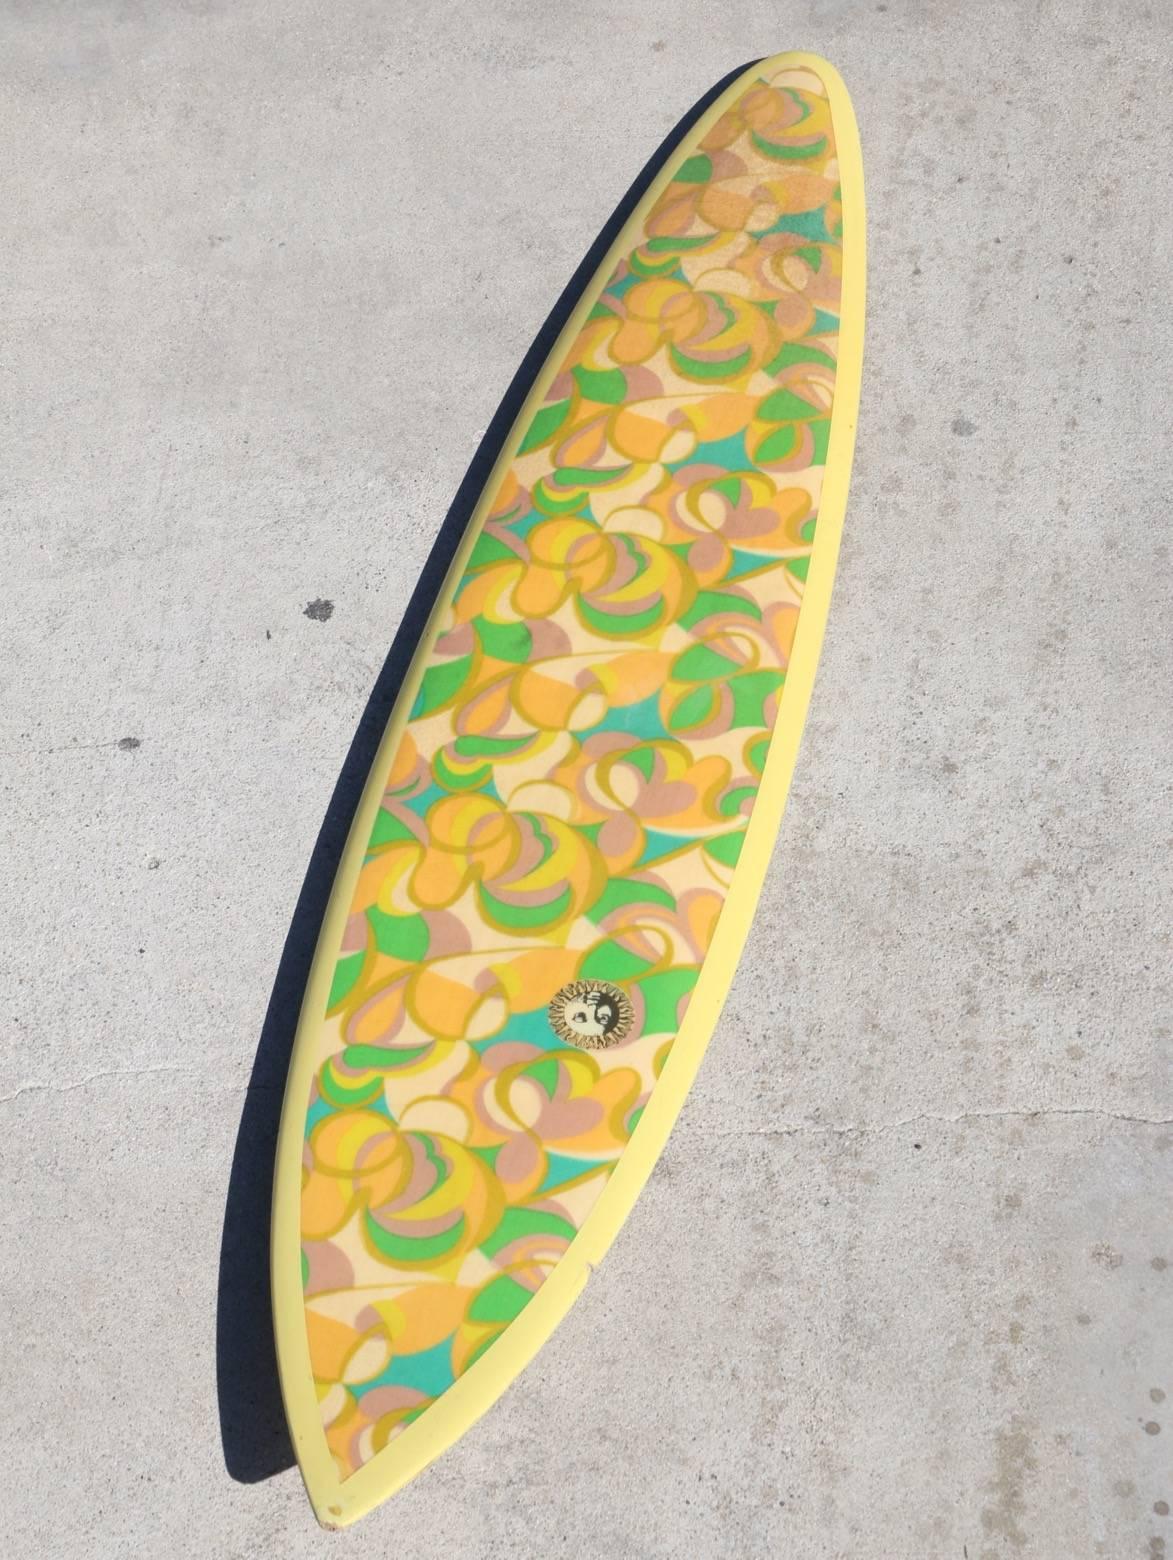 The fantastic array of patterned sherbet colors: Orange, lime, lemon, watermelon and honeydew with mango rails and bottom make this all original 1960s dextra big-wave-gun surfboard a sure Stand-out from a period of California history that dreams are